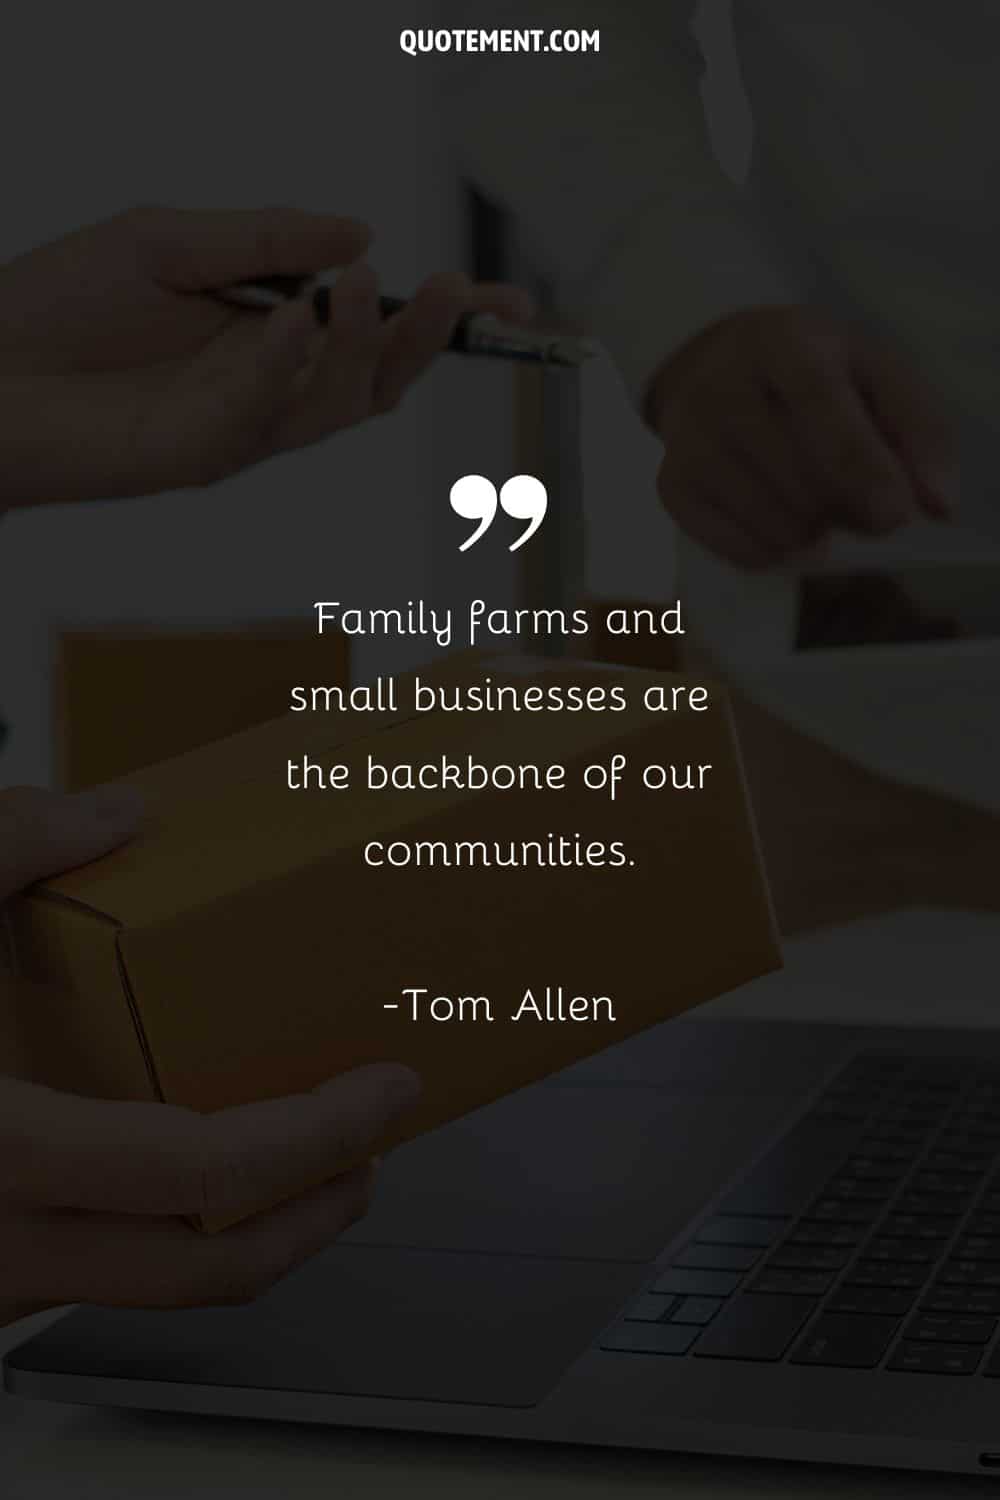 Family farms and small businesses are the backbone of our communities